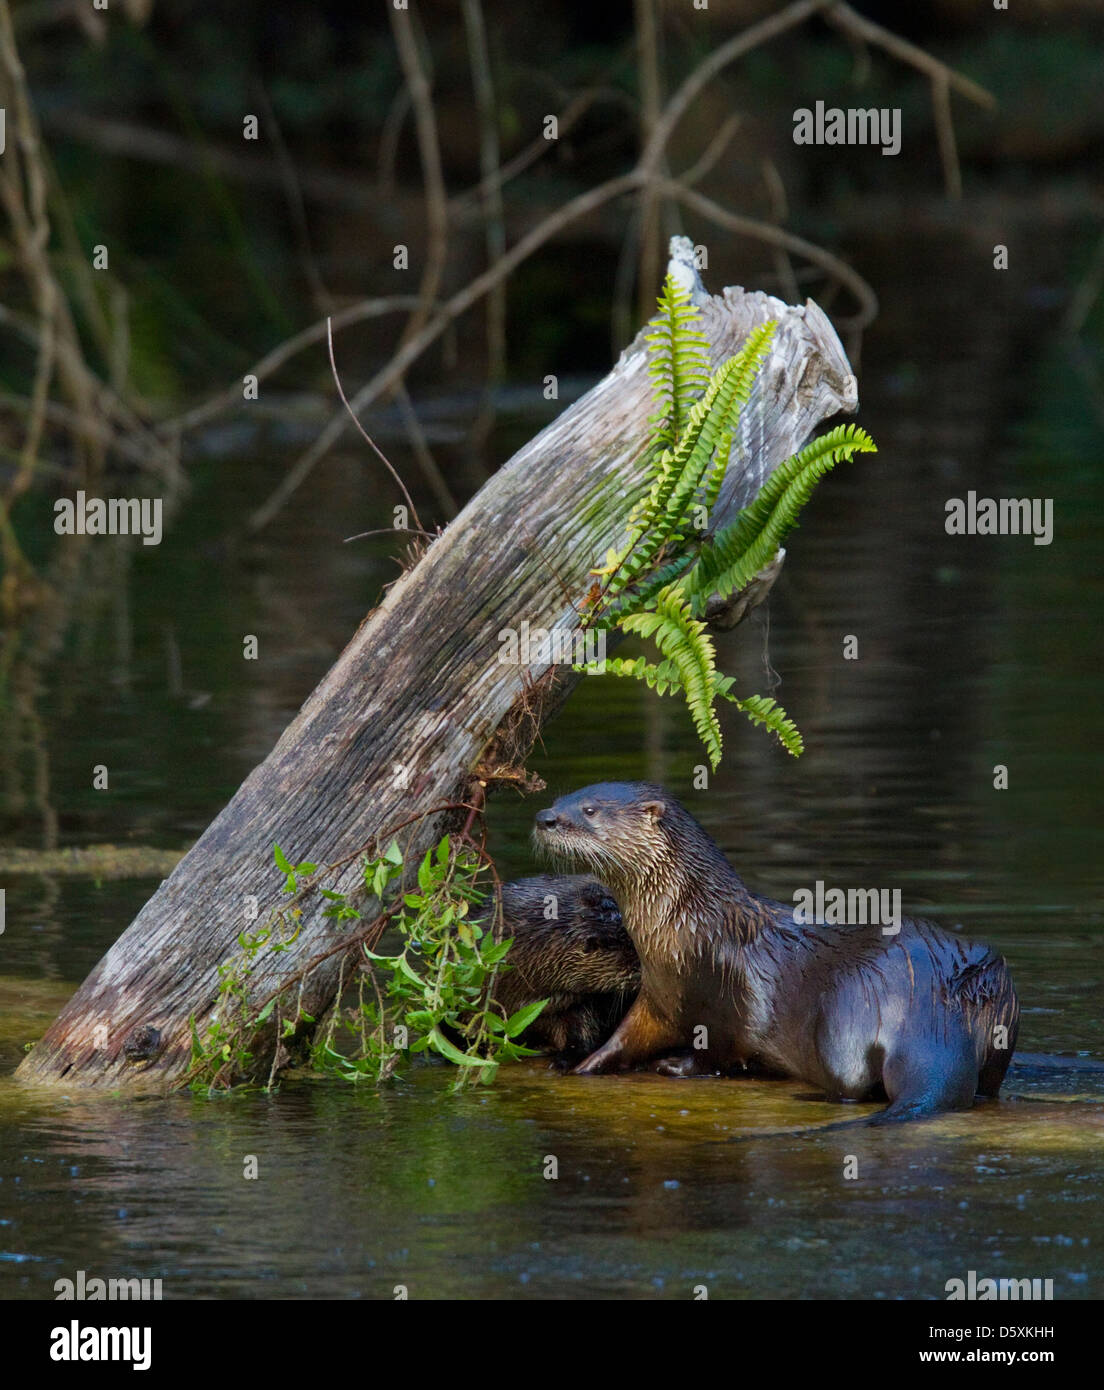 NORTH AMERICAN RIVER OTTERS (Lontra canadensis) Six Mile Cypress Slough Preserve, Fort Myers, Florida, USA. January Stock Photo